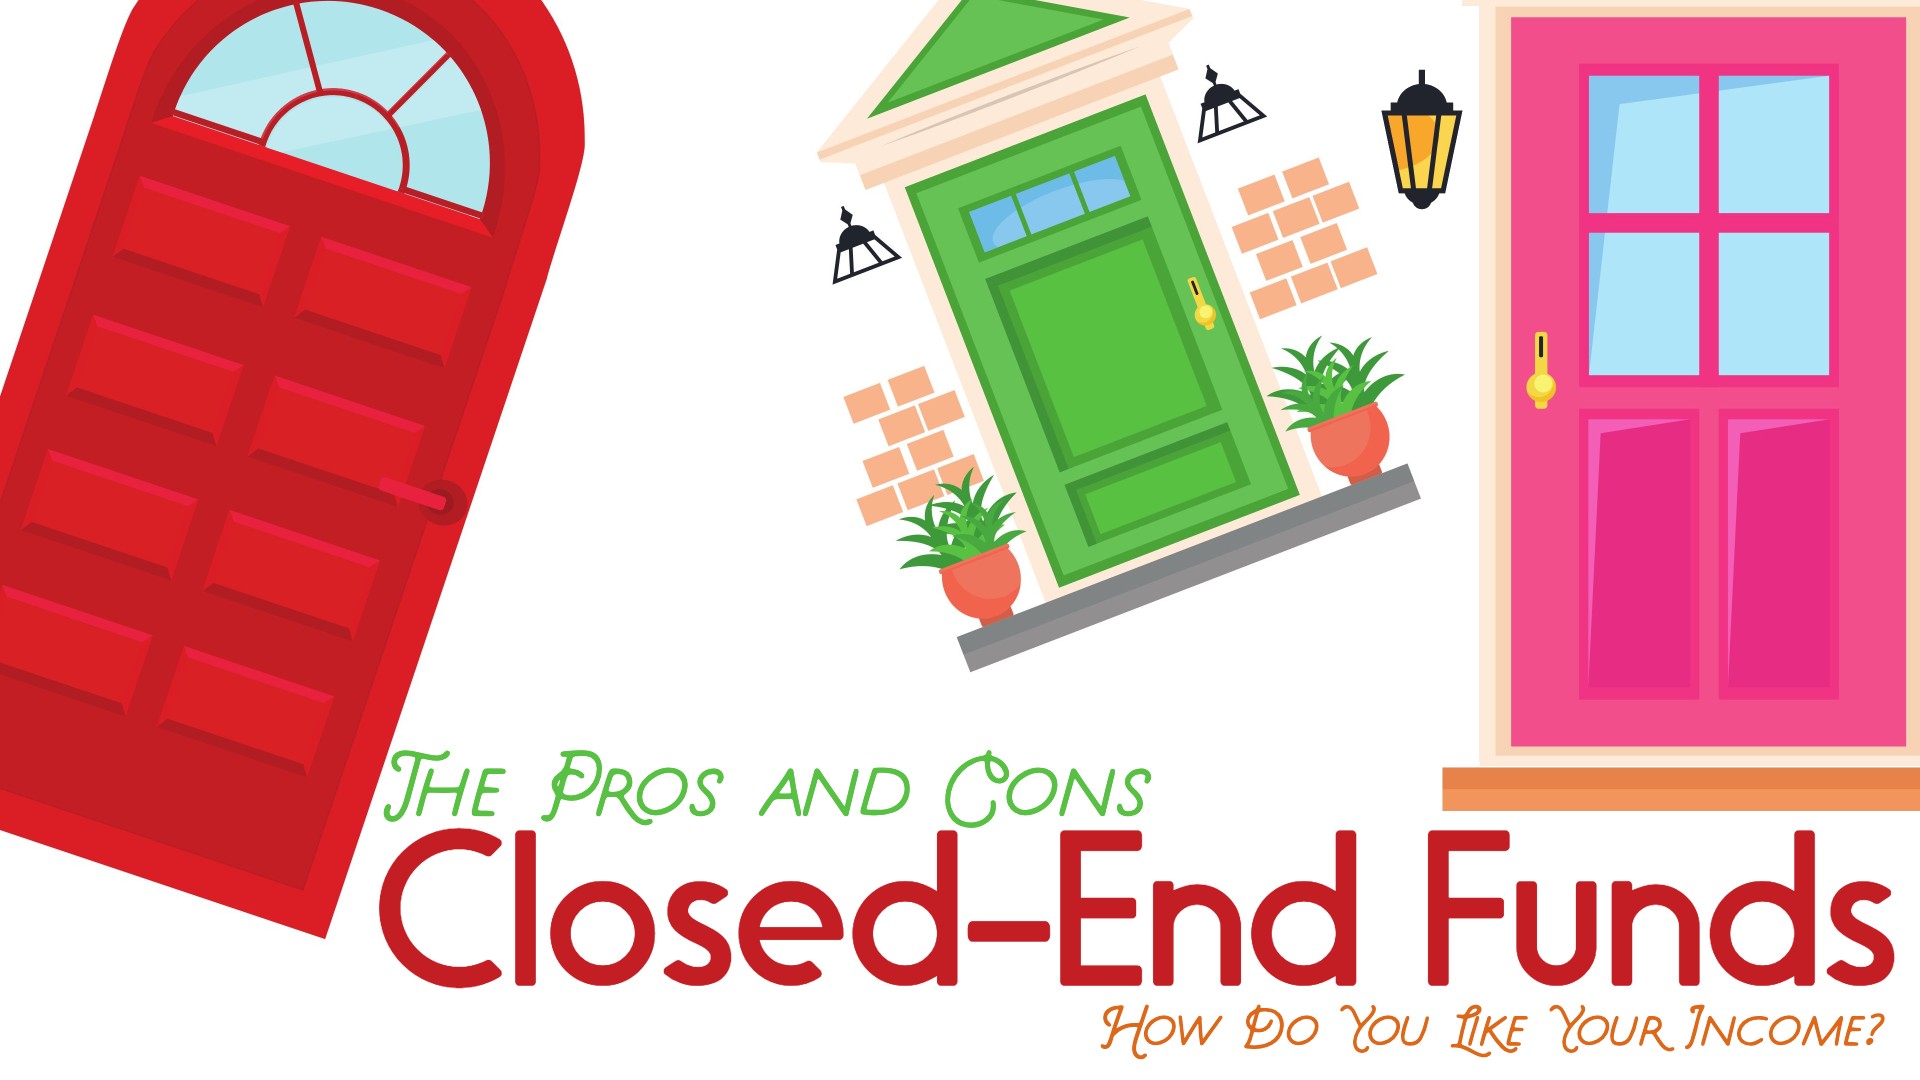 The Pros and Cons of Closed-End Funds: How Do You Like Your Income?